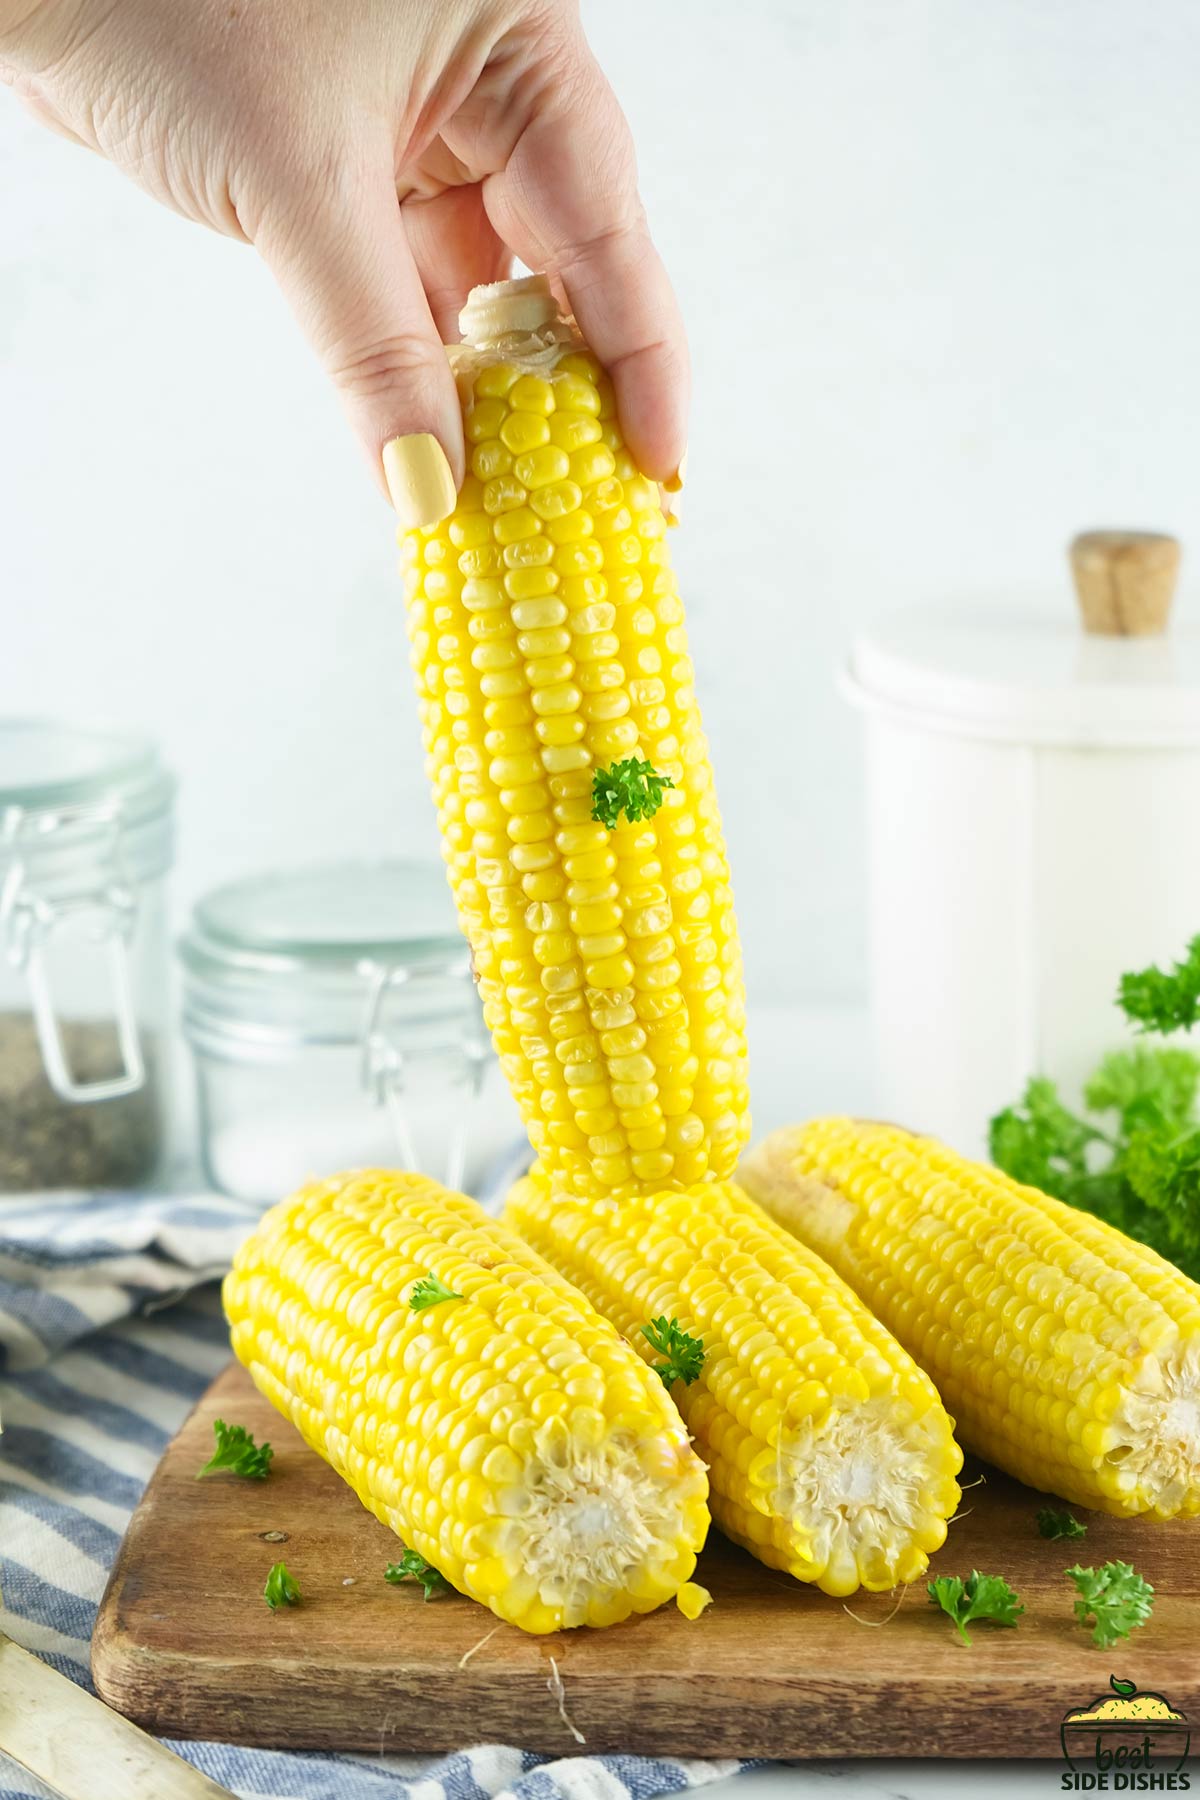 Lifting a corn on the cob from a pile of corn